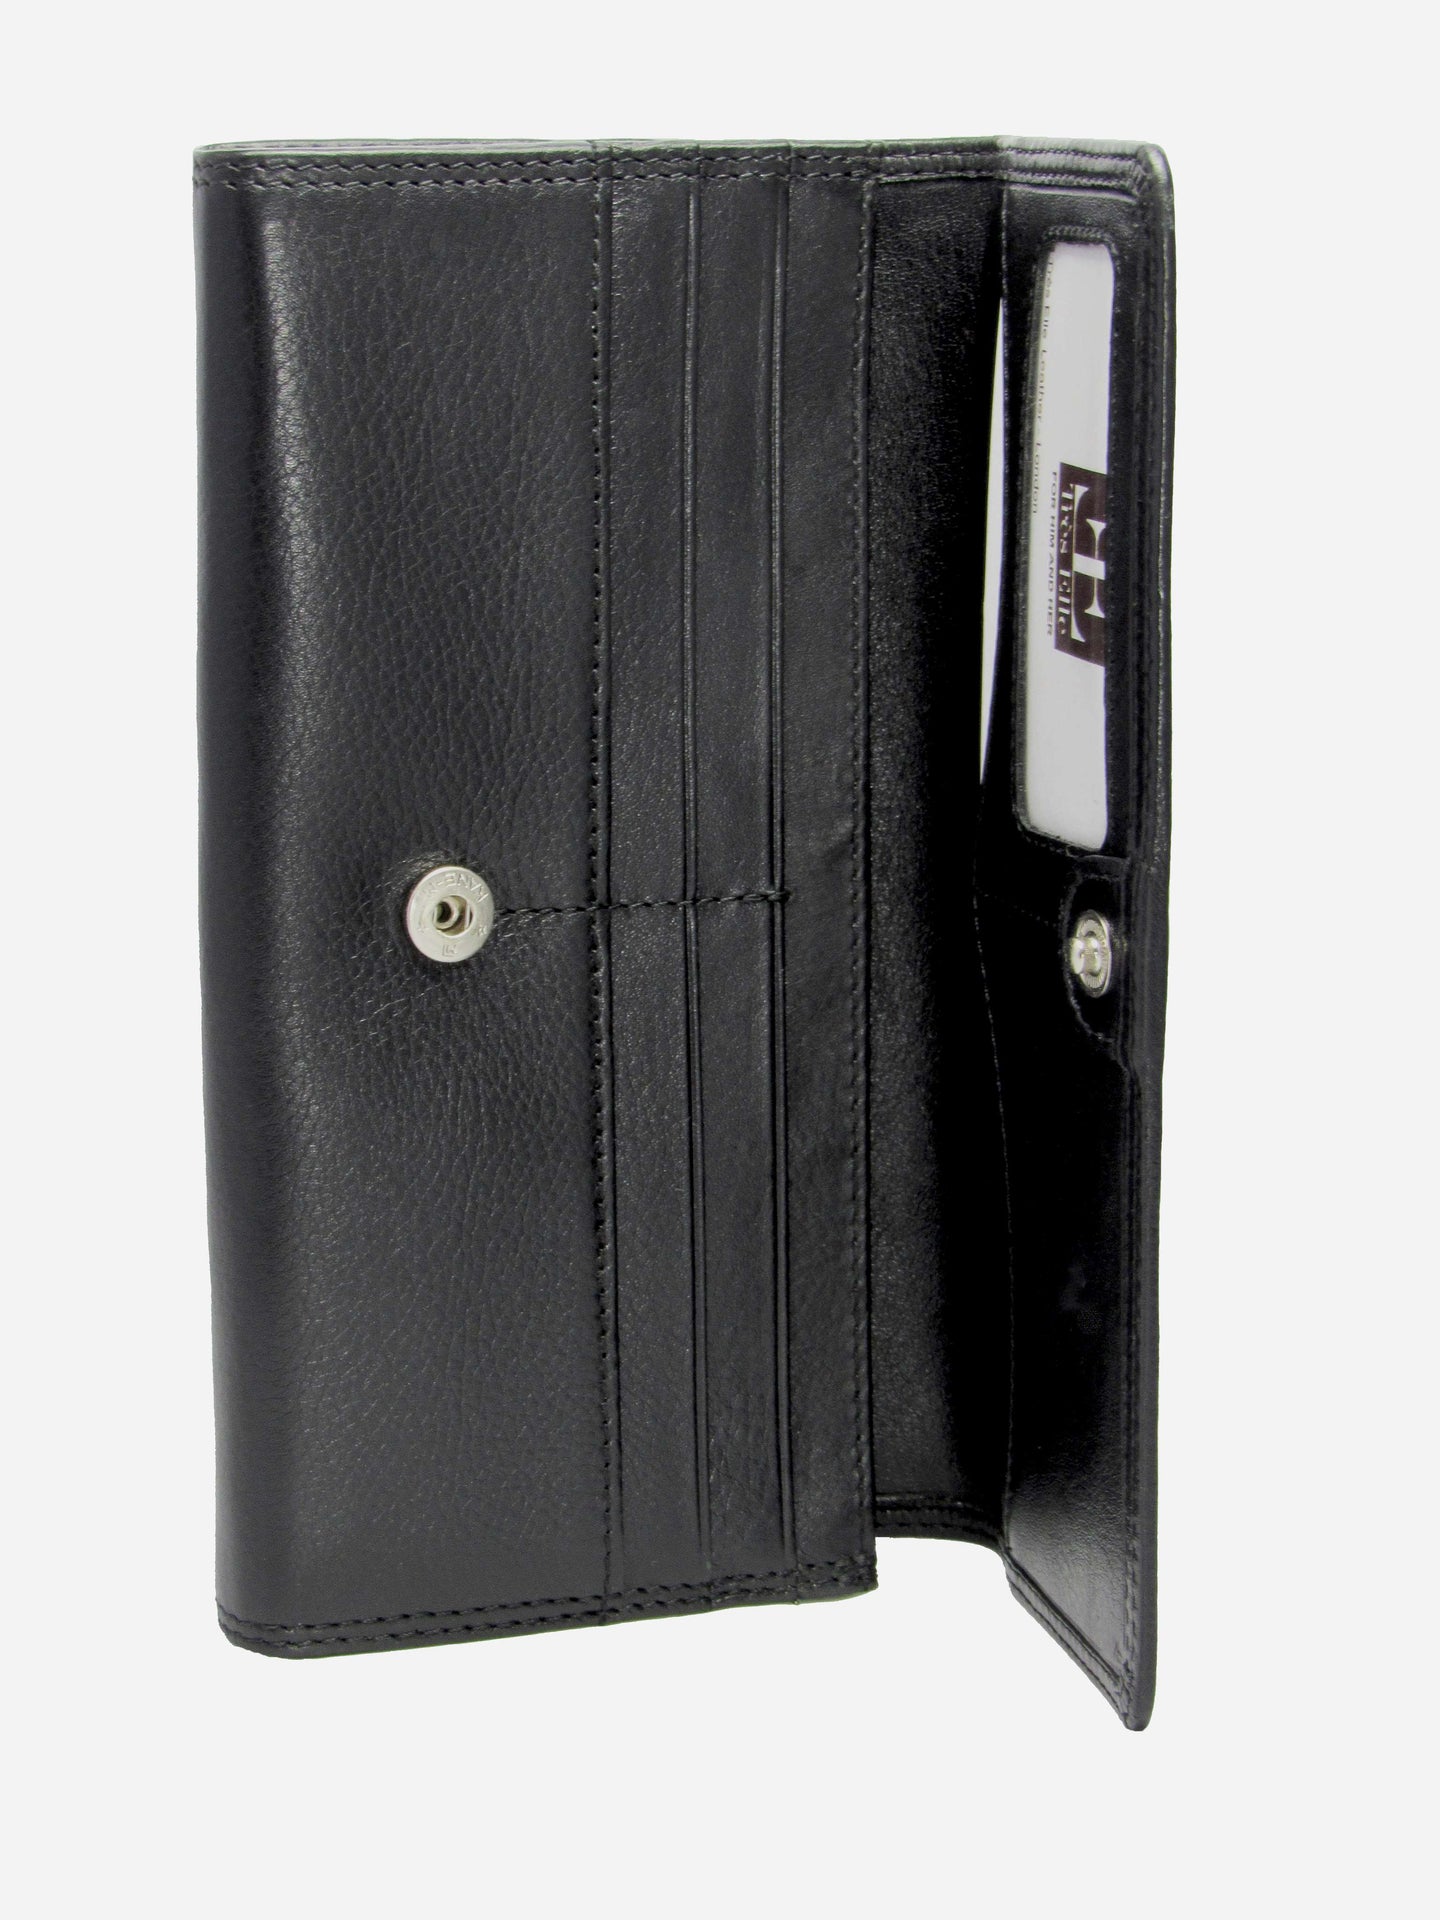 Purse's Real Leather with RFID Protection 3